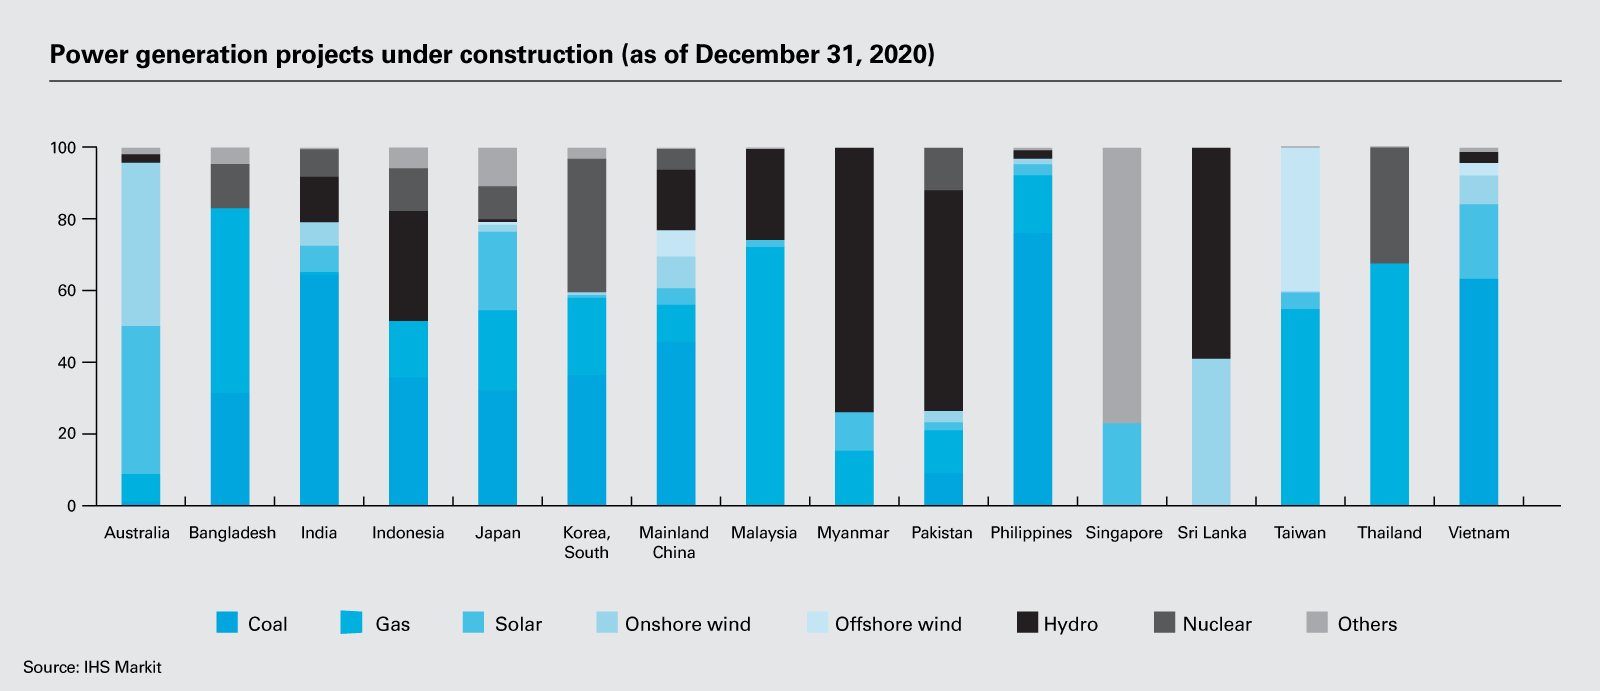 Power generation projects under construction